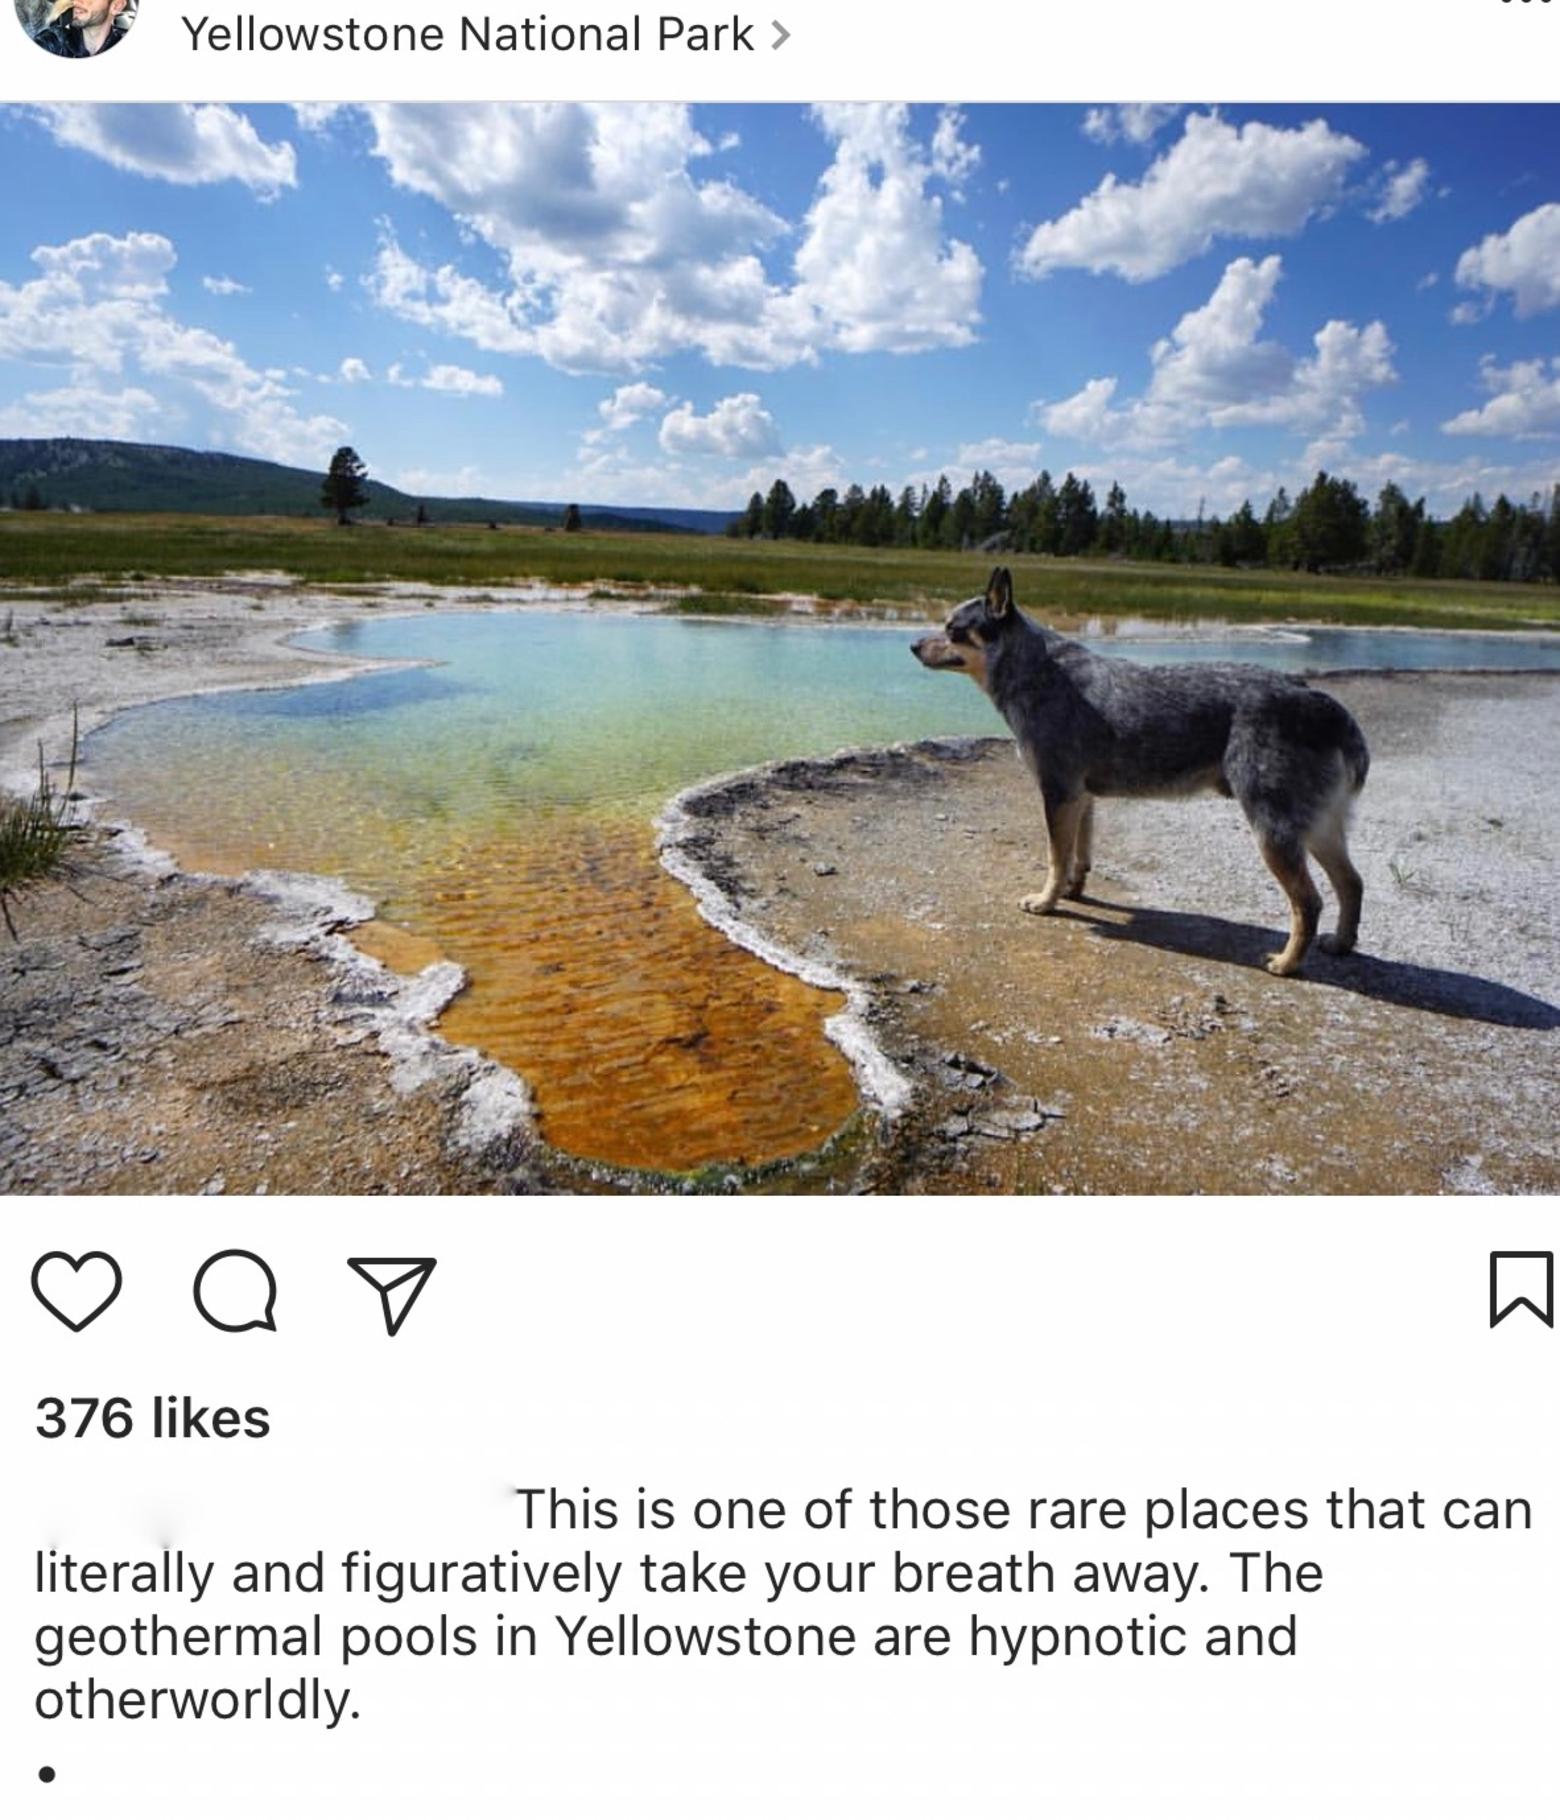 Visiting our most spectacular (and sensitive) wild landscapes is on the bucket list of a a lot of people, but should we also treat those places as if they are on the must-see bucket lists of our dogs? An Instagram post from a visitor to Yellowstone ironically showing his dog doing something illegal—being inside a thermal basin off leash. 